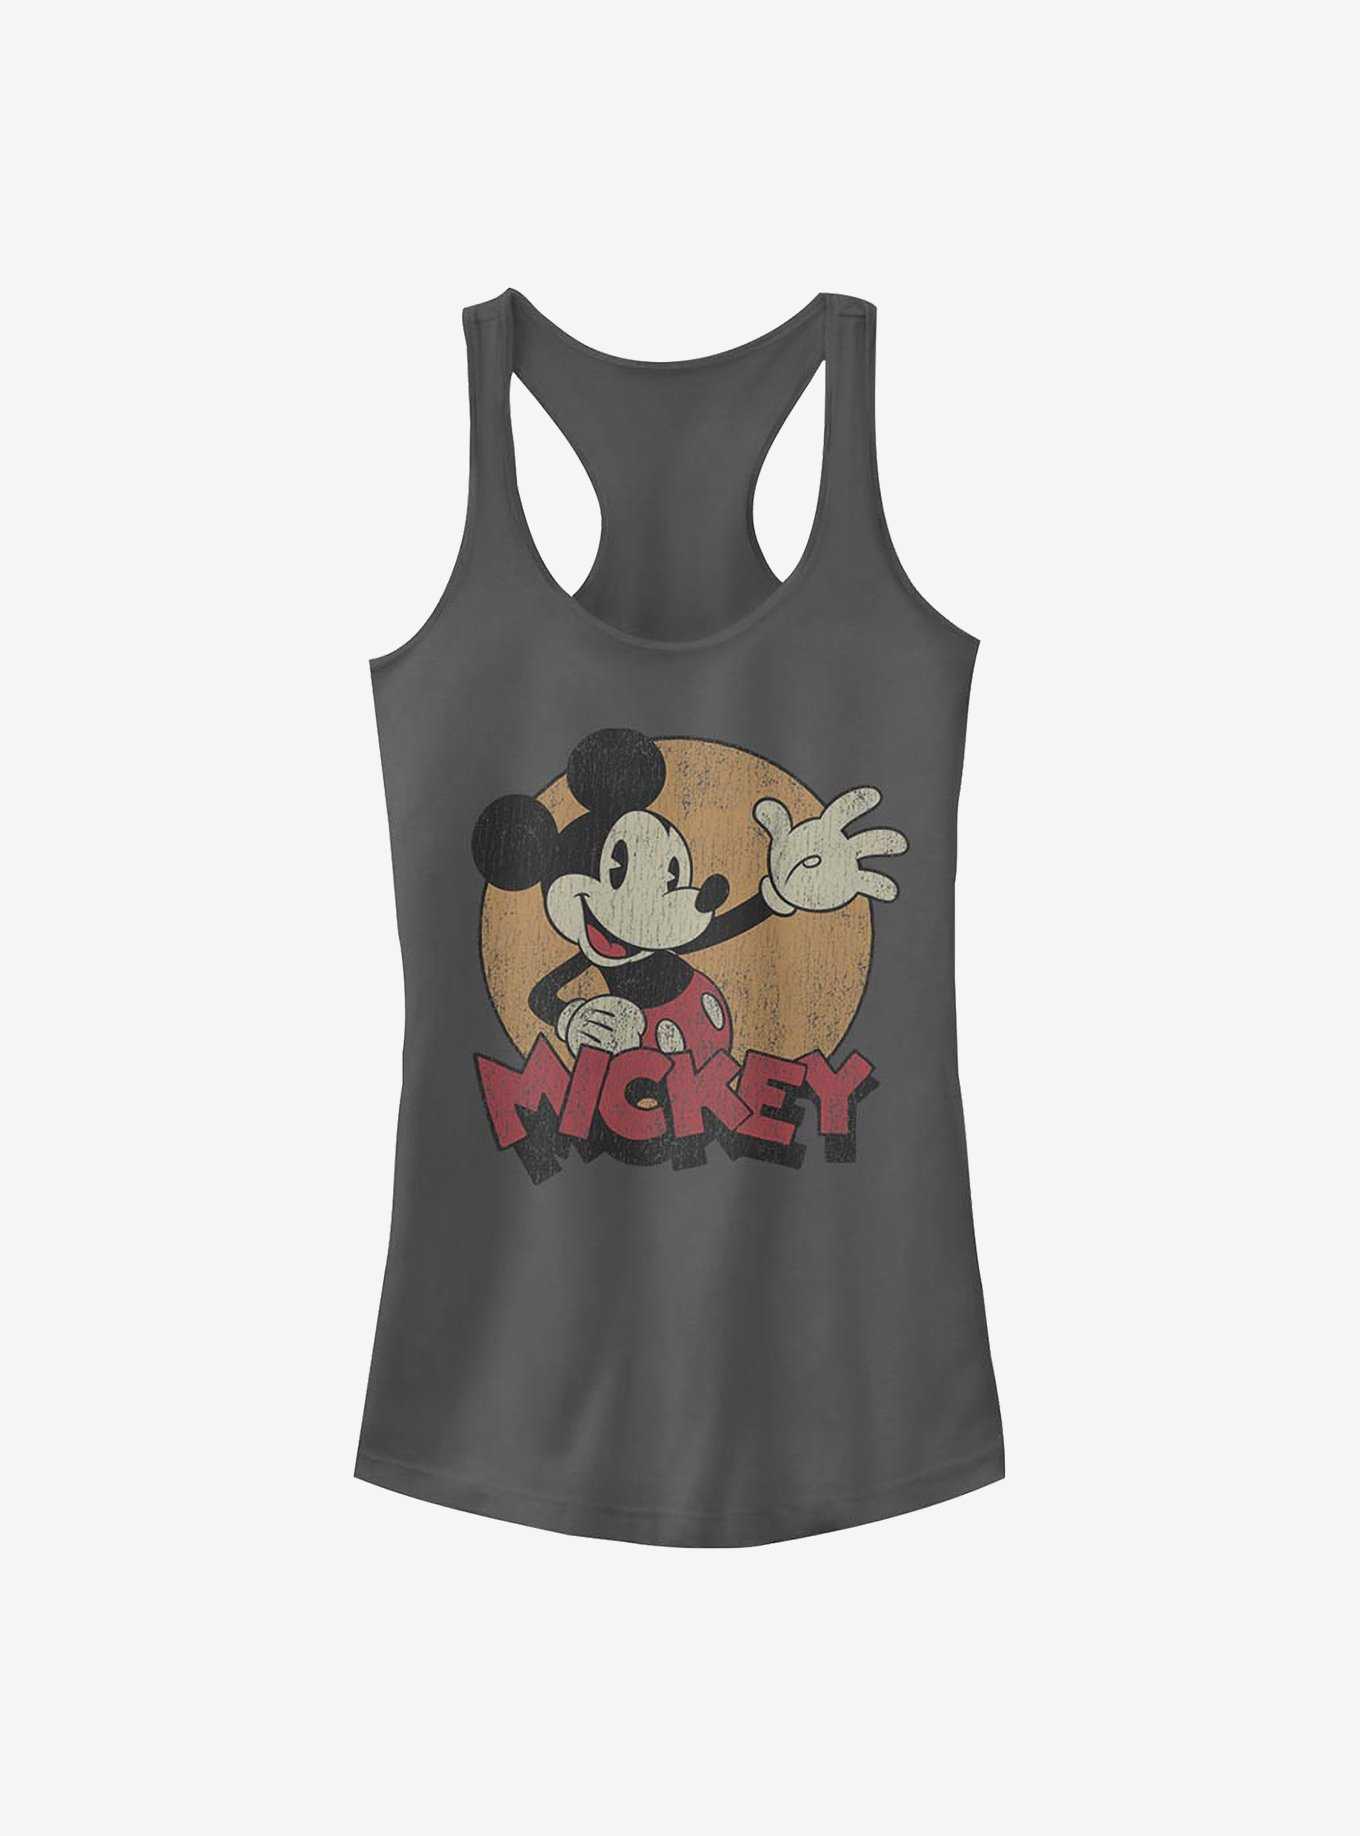 Disney Mickey Mouse Tried And True Girls Tank, , hi-res